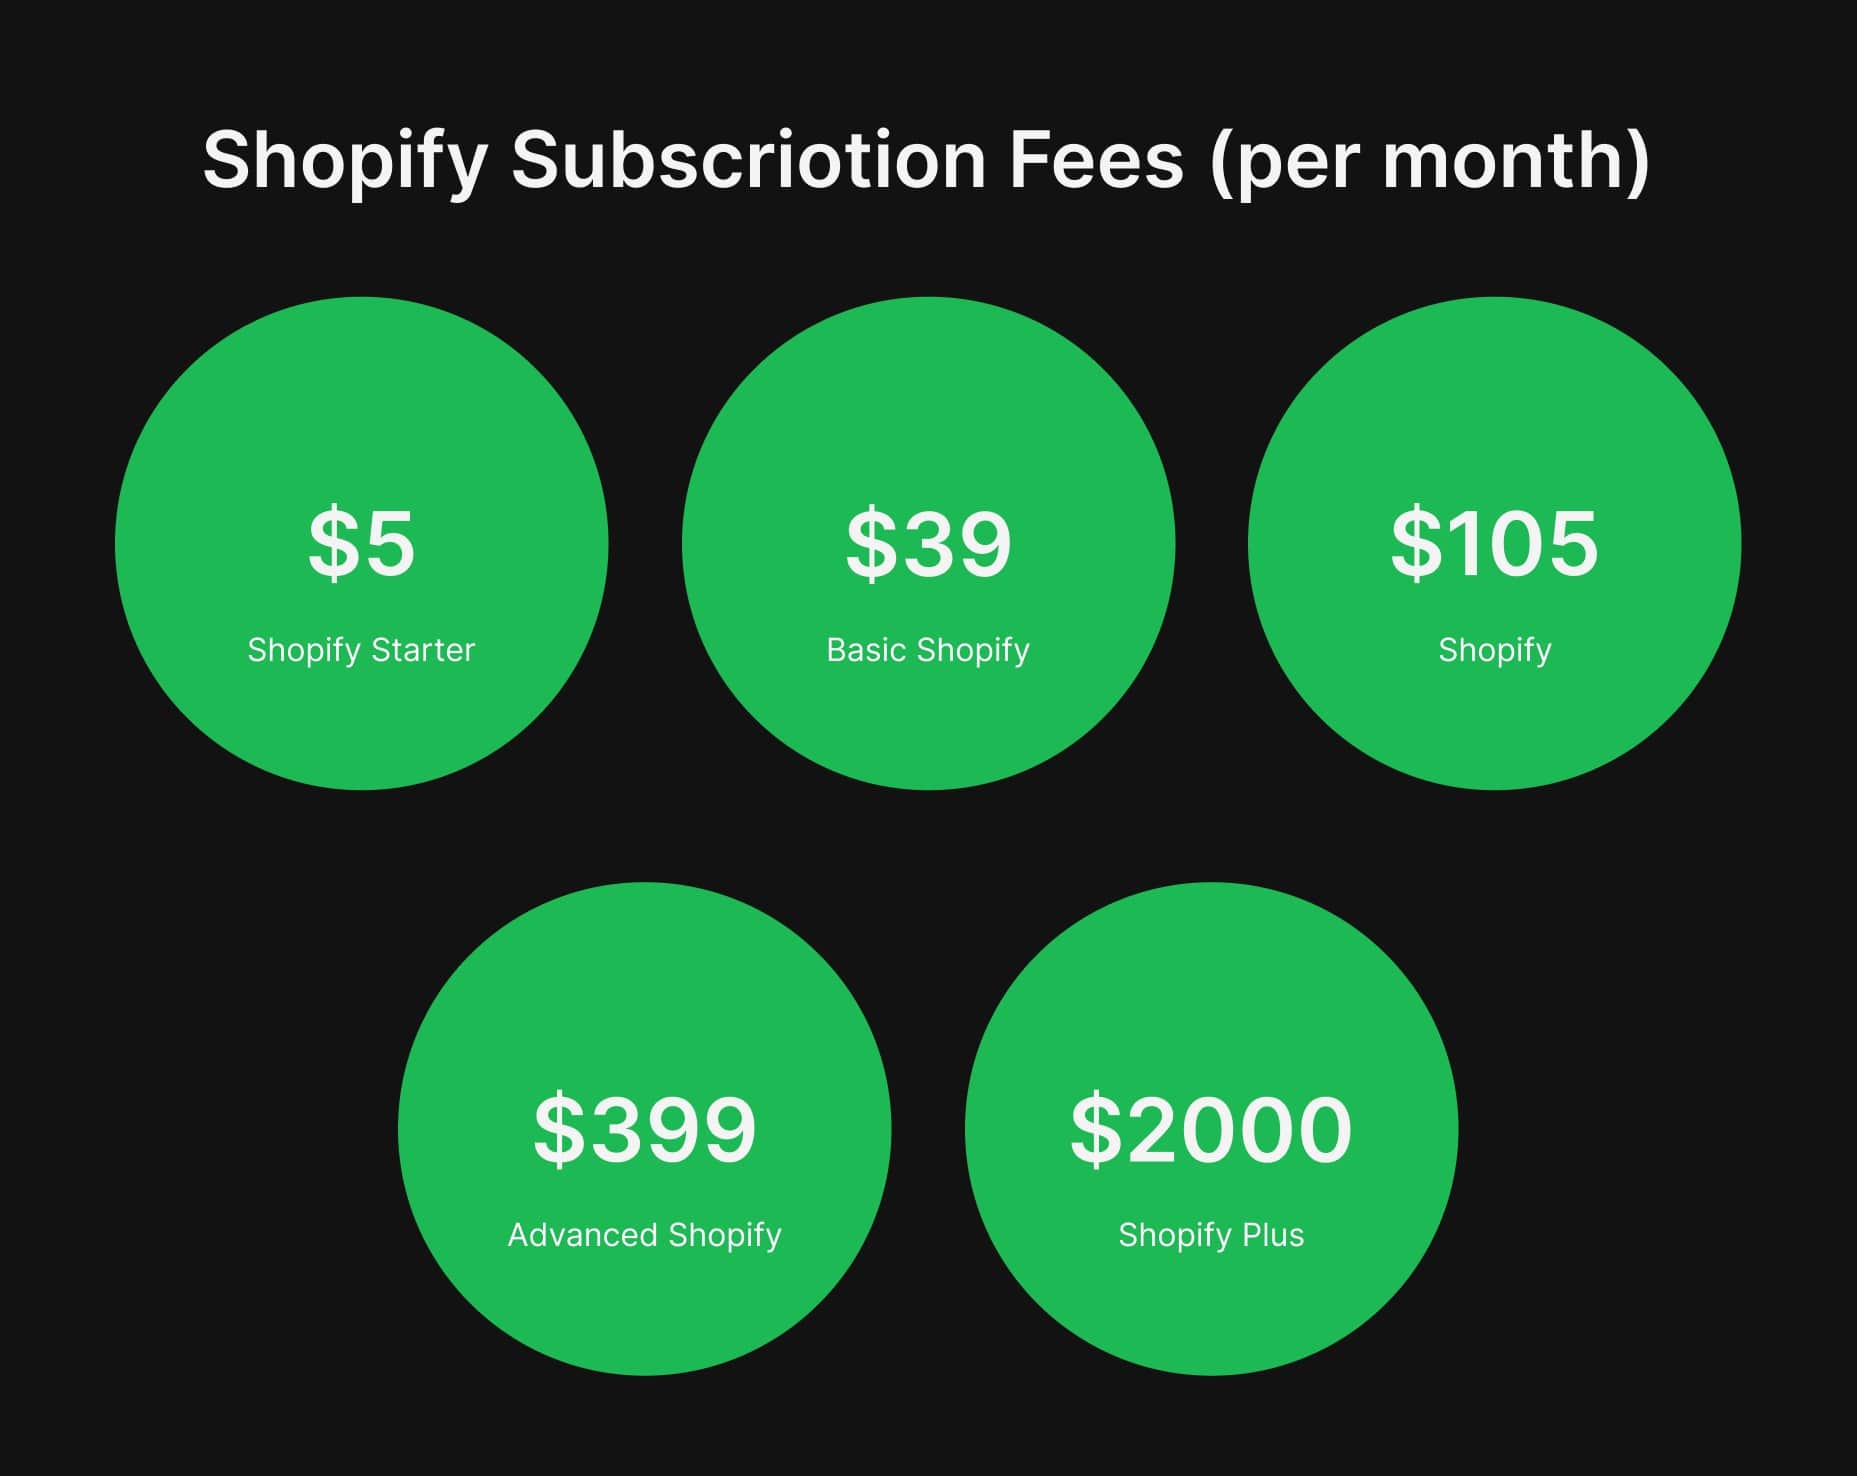 Shopify Subscription Fees